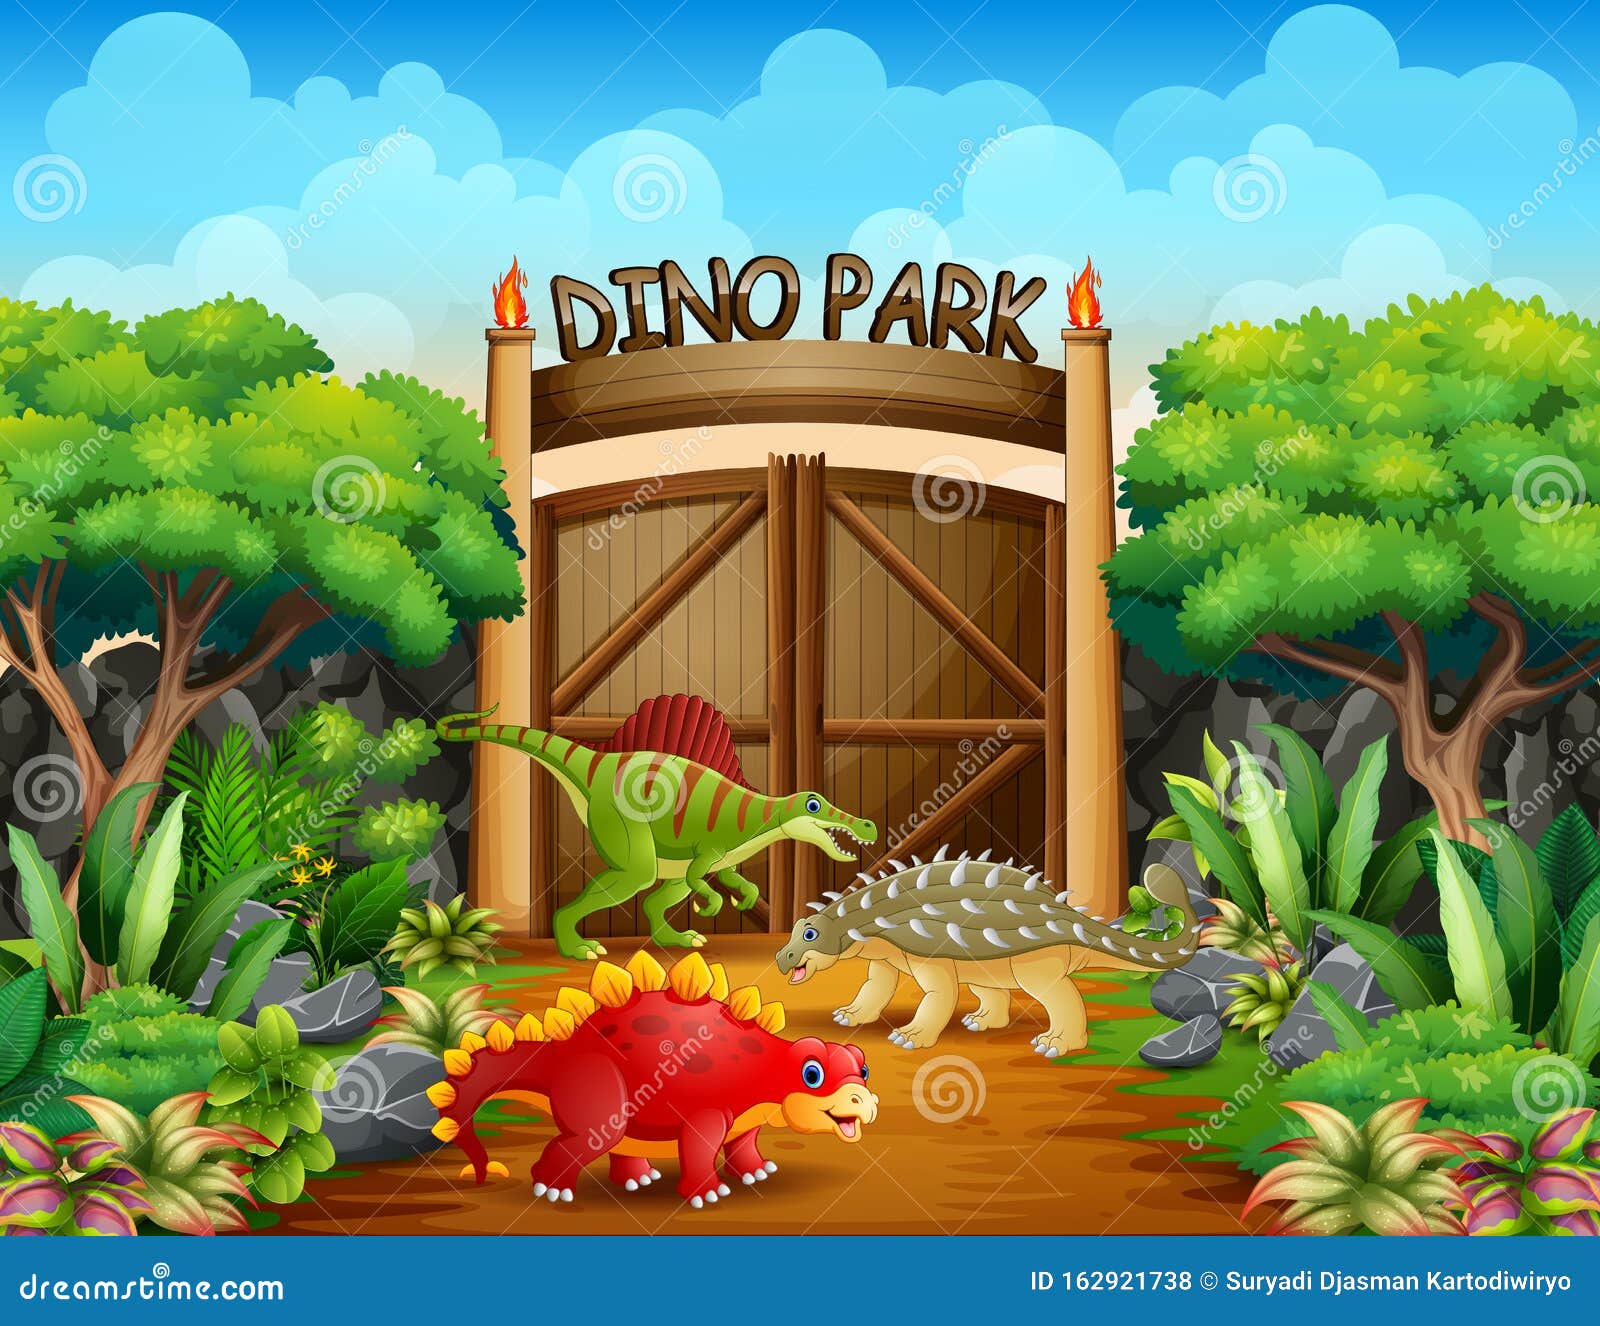 different dinosaurs in dino park 